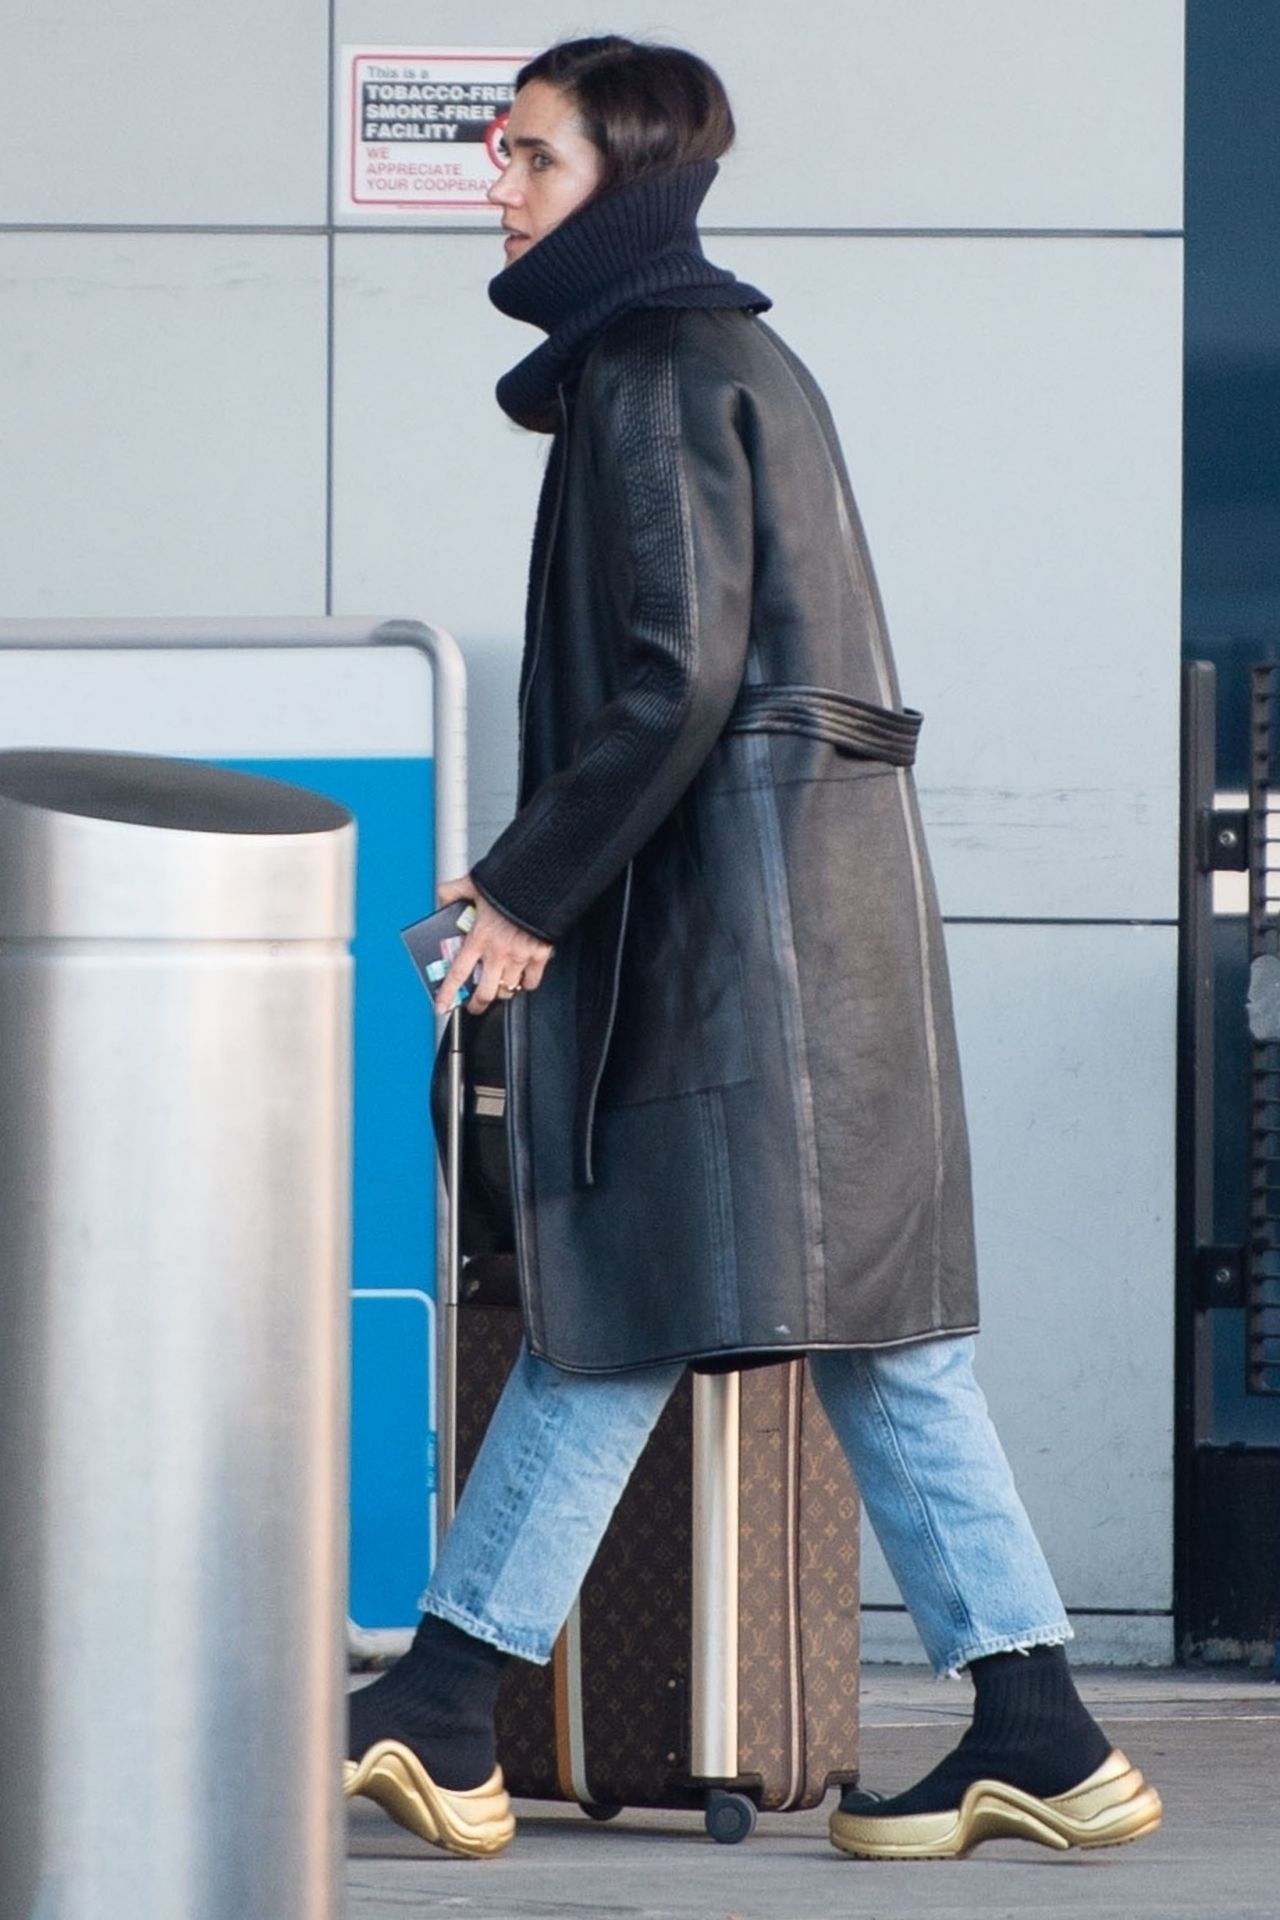 jennifer connelly airport